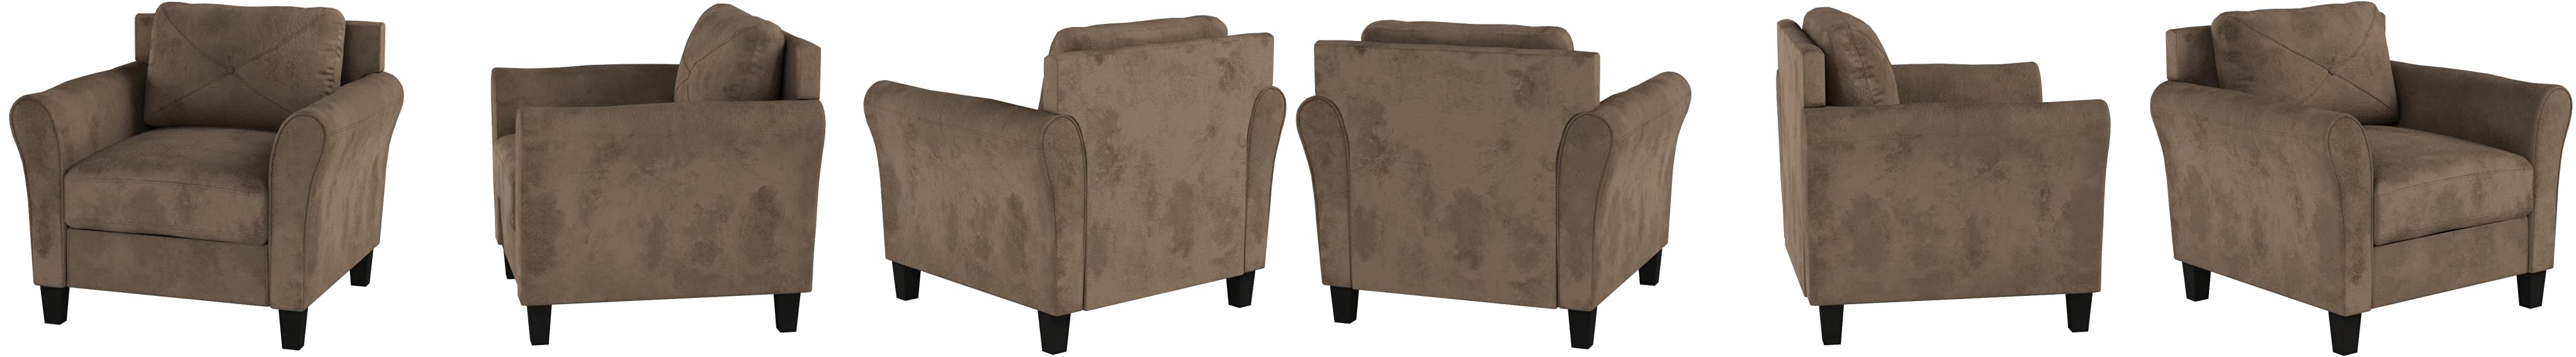 Tufted Club Chair with Metal Legs, Modern arm Chair for Living Room